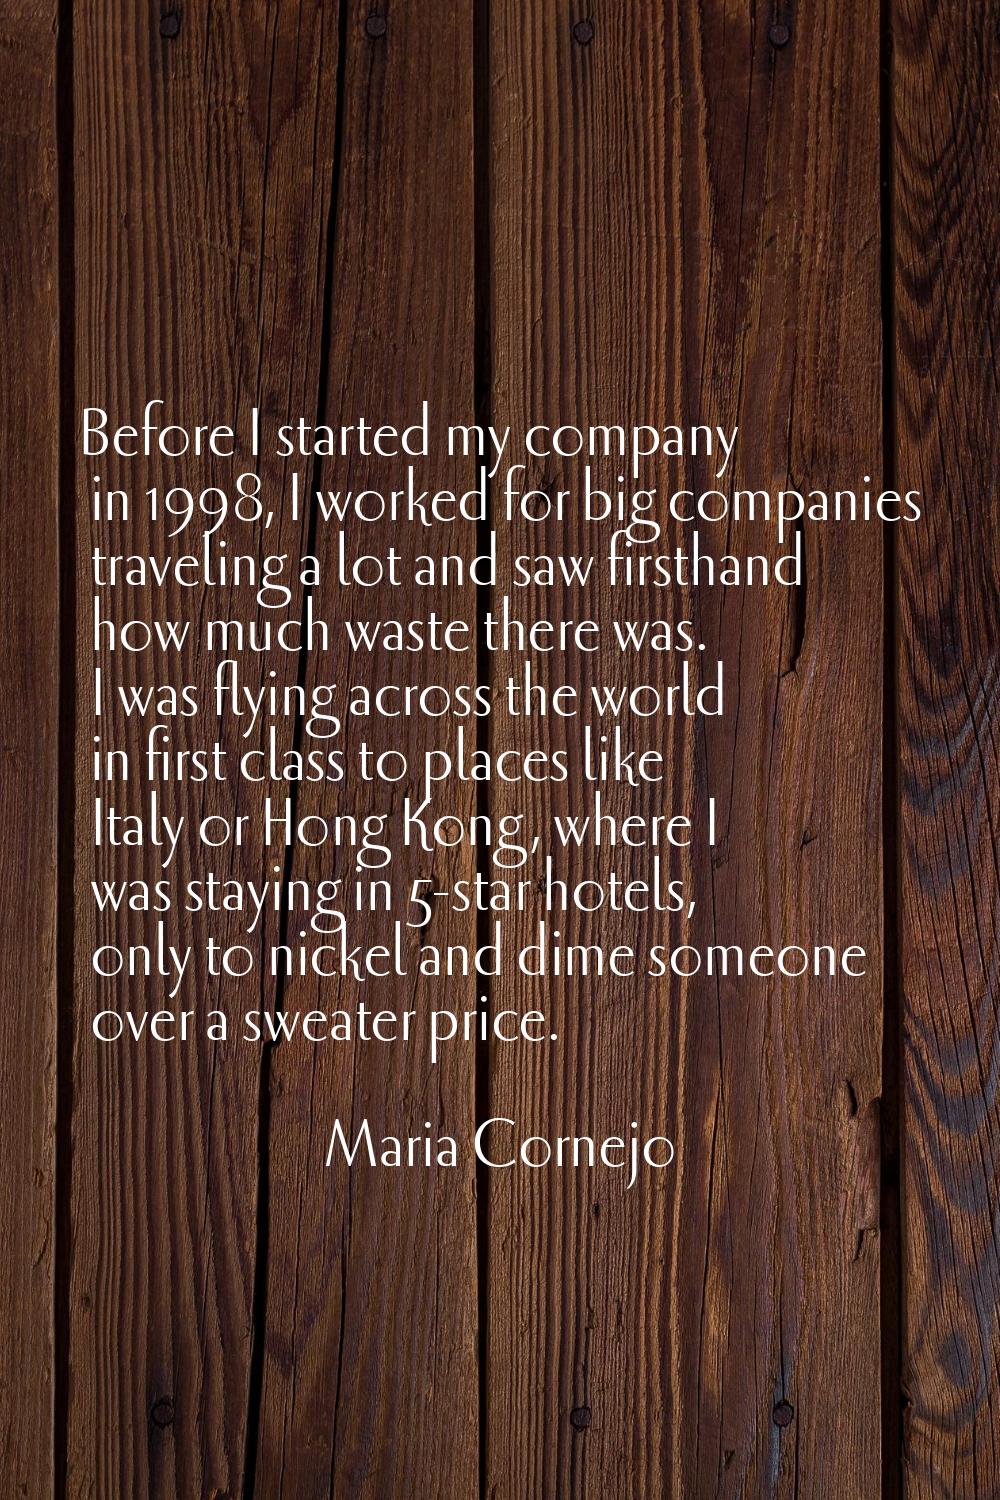 Before I started my company in 1998, I worked for big companies traveling a lot and saw firsthand h